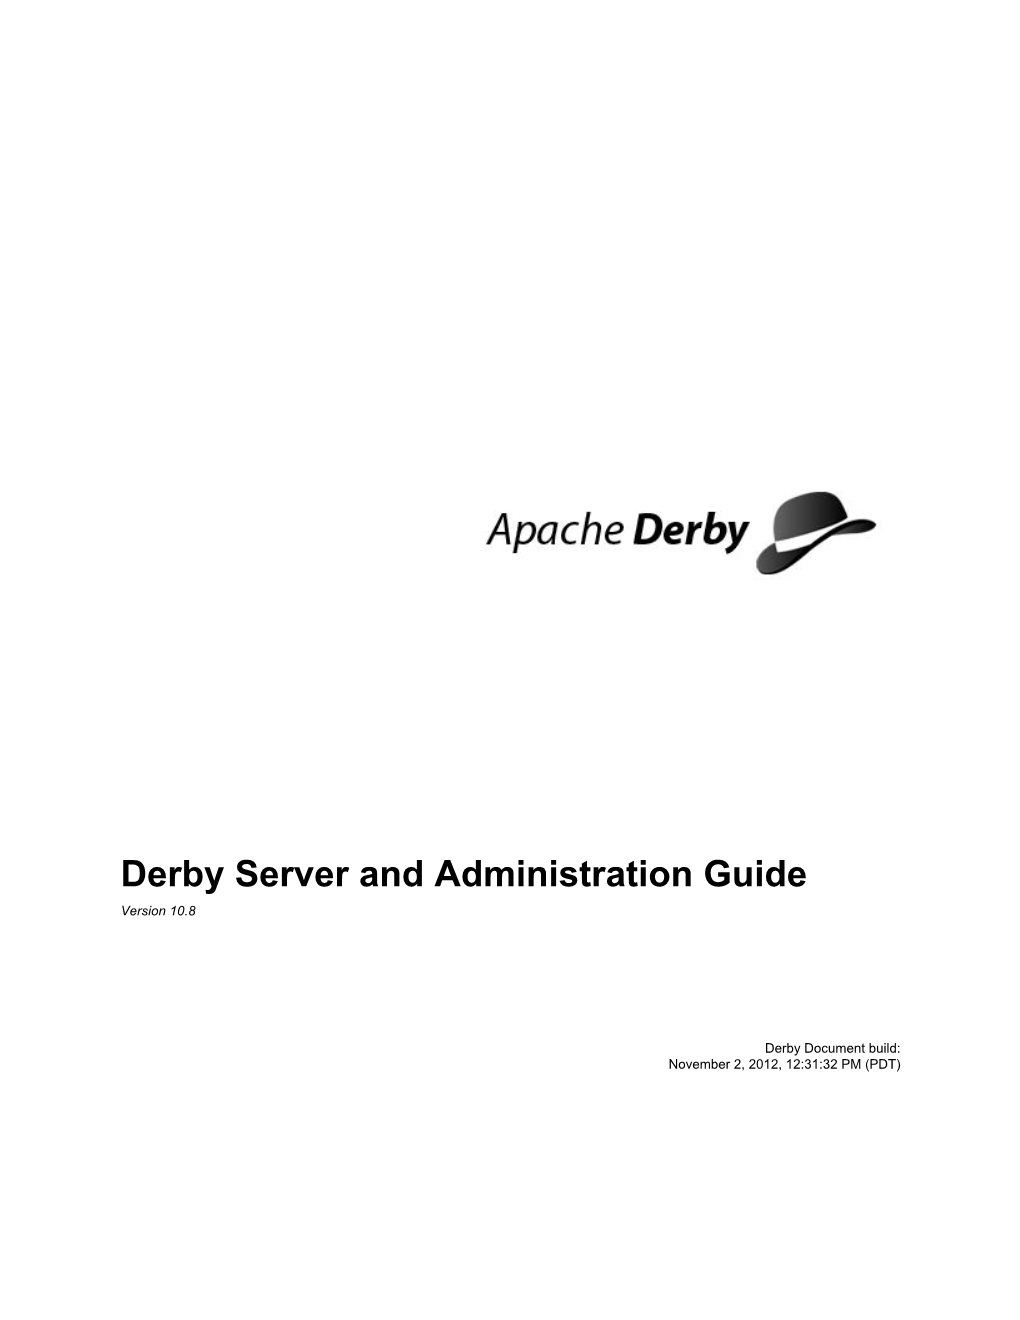 Derby Server and Administration Guide Version 10.8